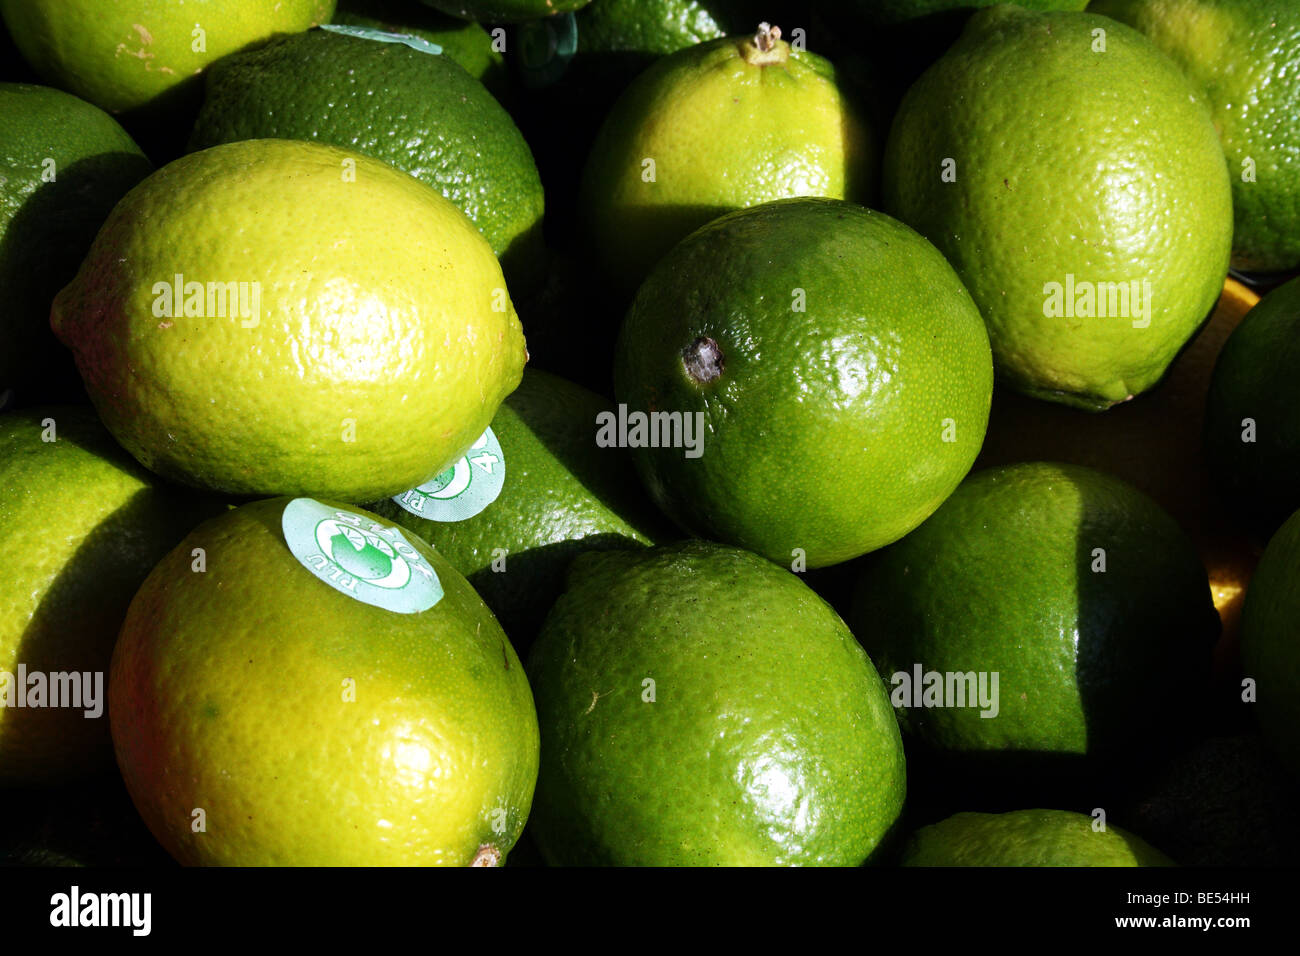 Green Limes Family Rutaceae The Lime is a Citrus Fruit Stock Photo